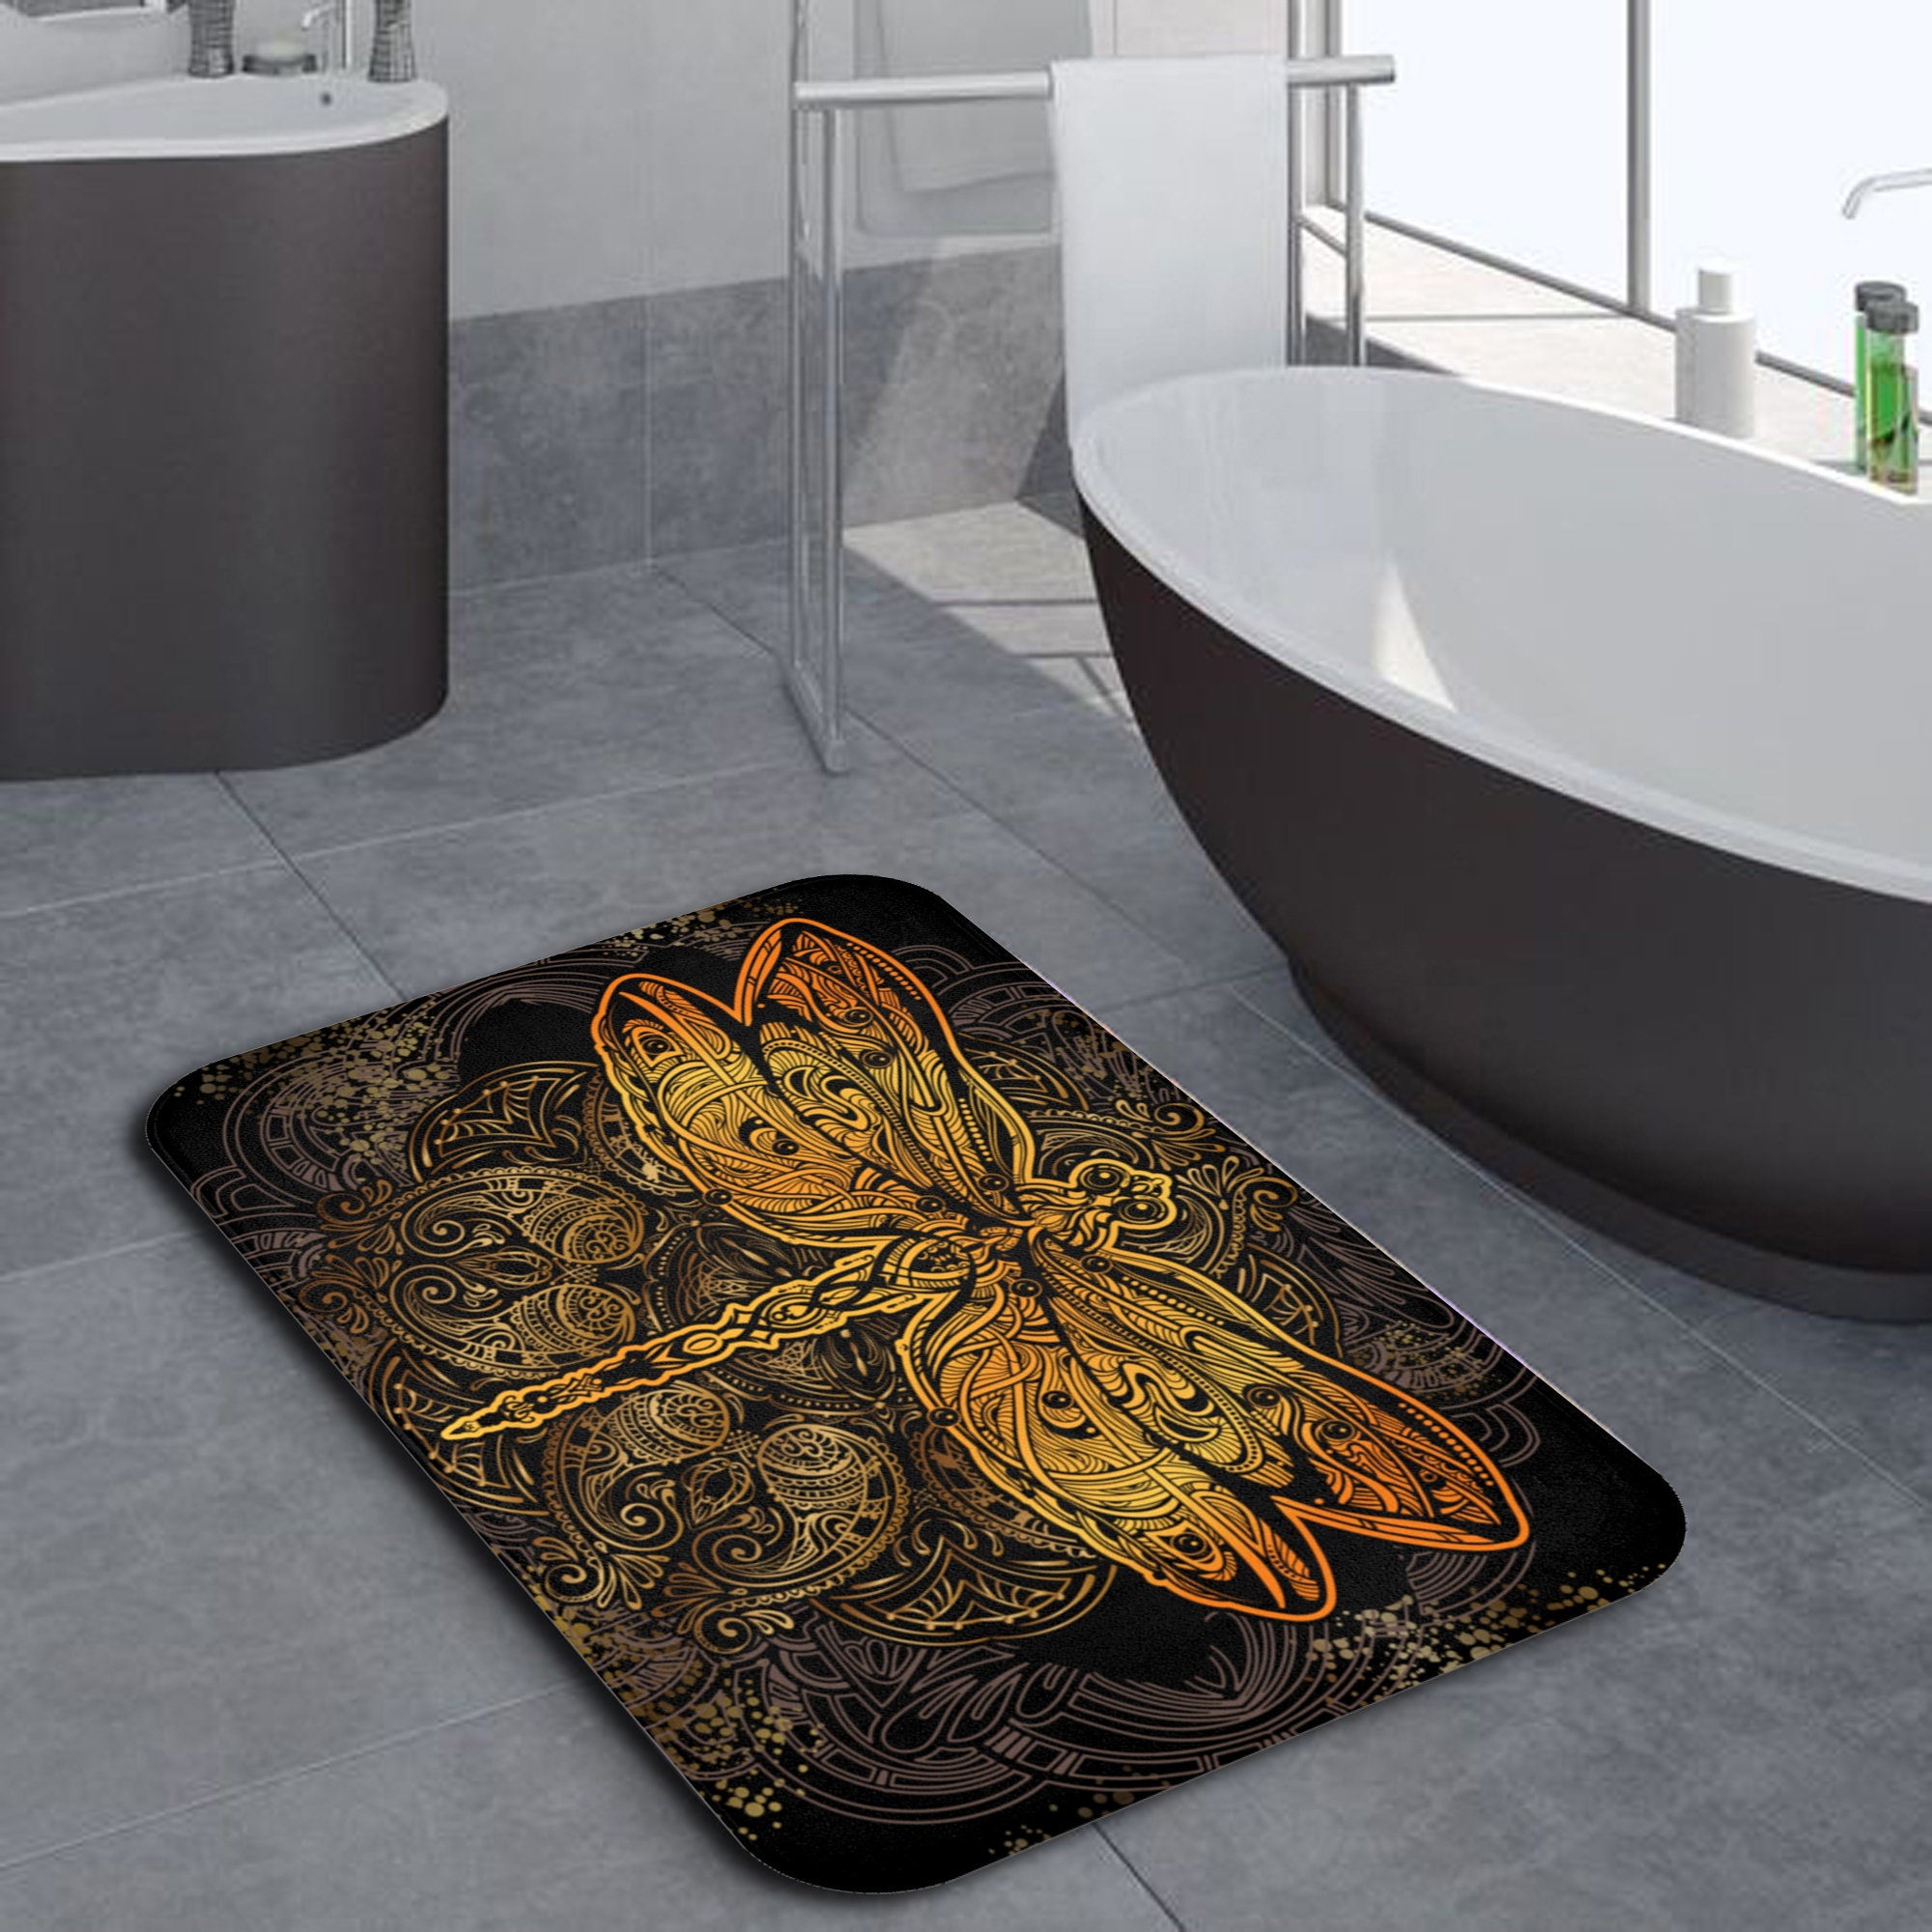 Gilden Tree Bathroom Mat Absorbent Cotton Quick Dry for Shower, Bath & Bathtub Washable Thin, Modern Style (Clay)